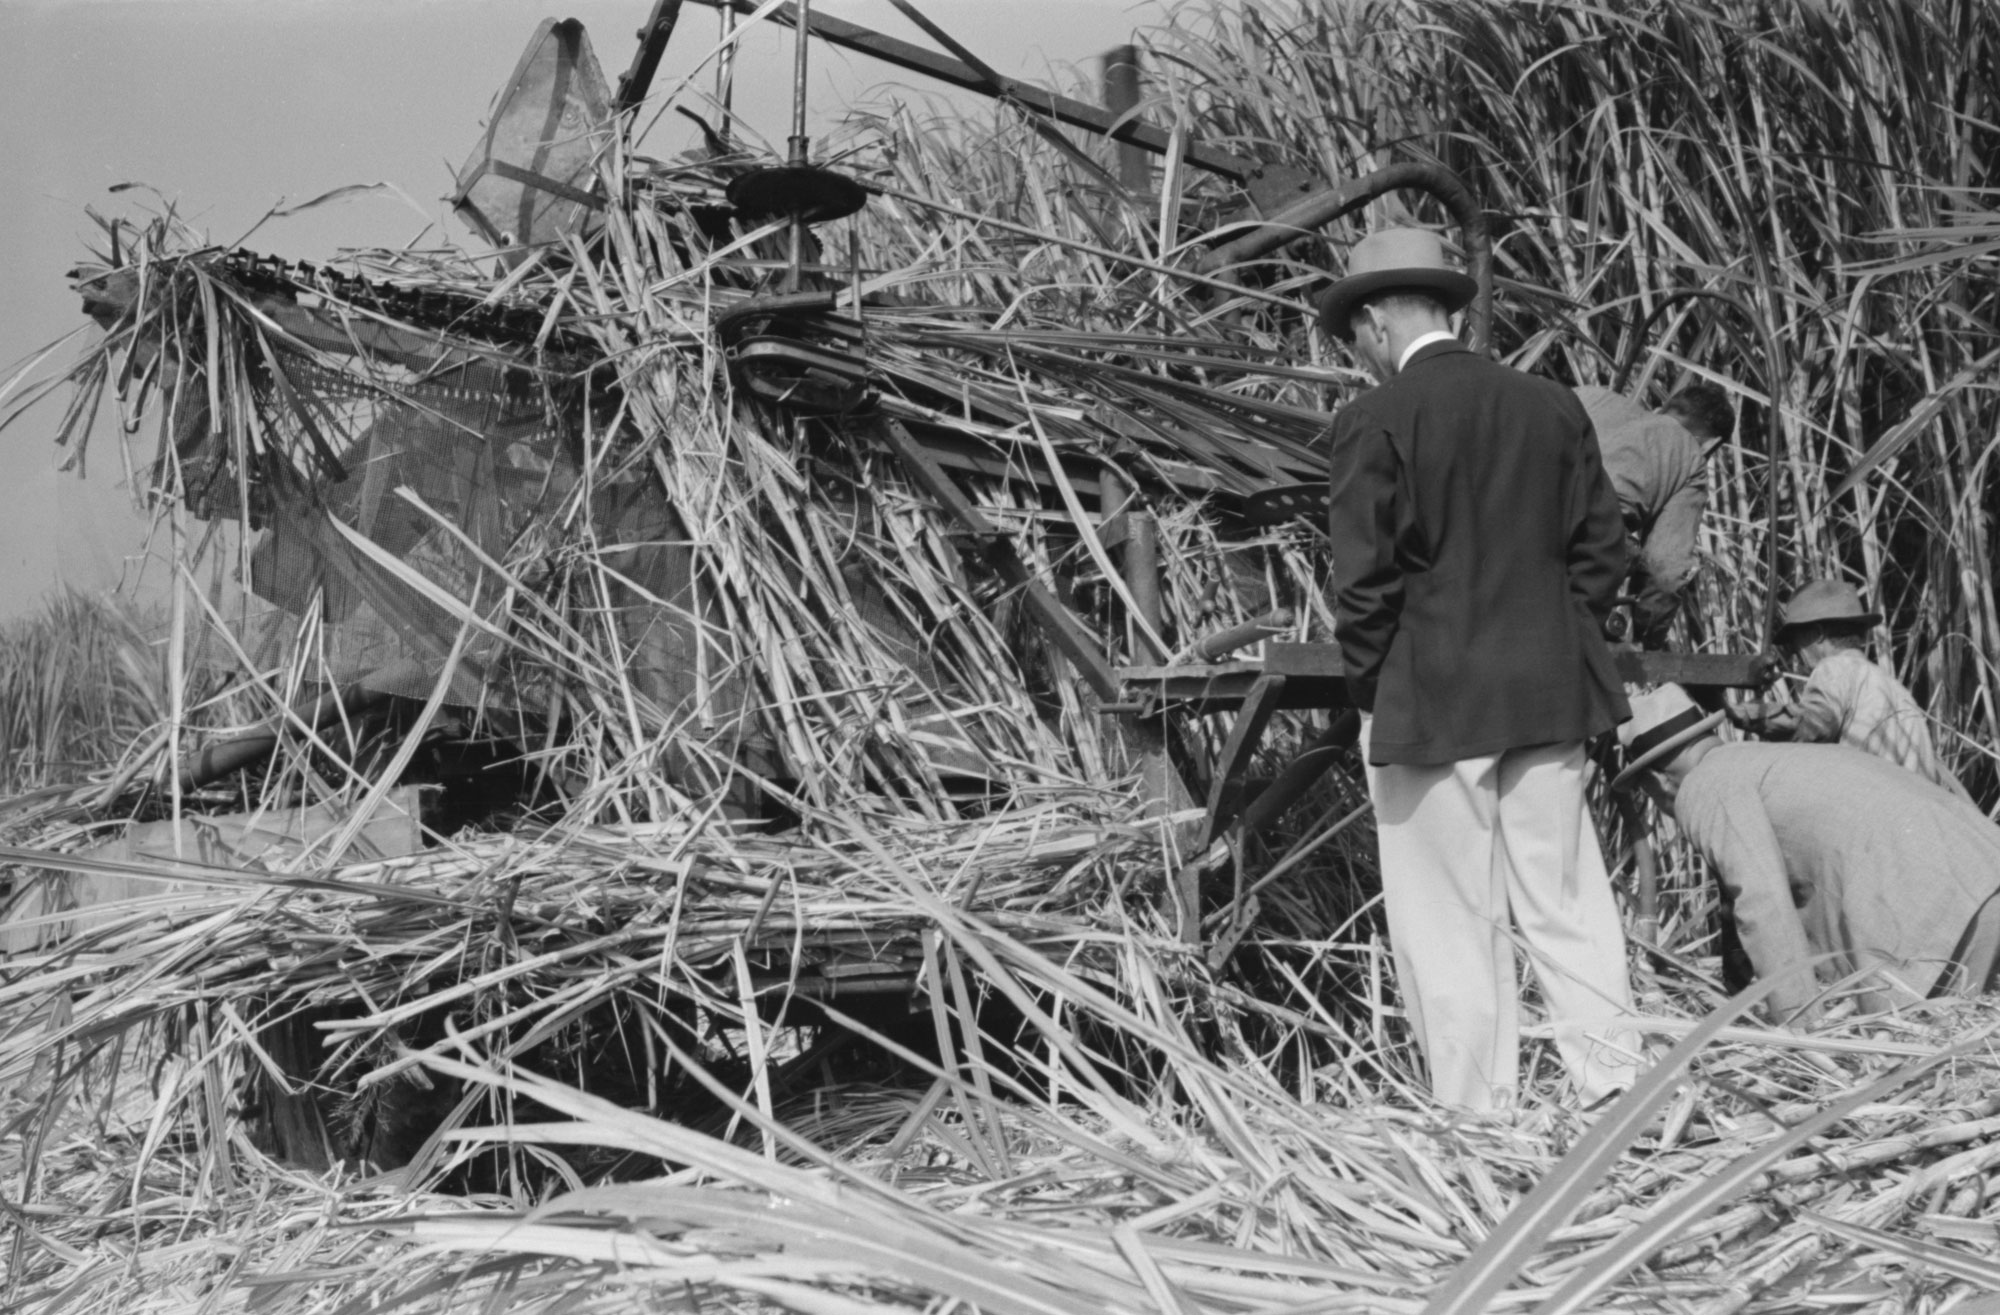 Black and white photograph of men inspecting a Wurtele sugarcane harvester in Louisiana, 1938. The photo shows a machine that is largely obscured by partially cut sugarcane. One man in a hat stands with his back to the viewer, looking at the machine. Two other men crouch beside him. A fourth man can be seen from the shoulders up, bent over the machine.